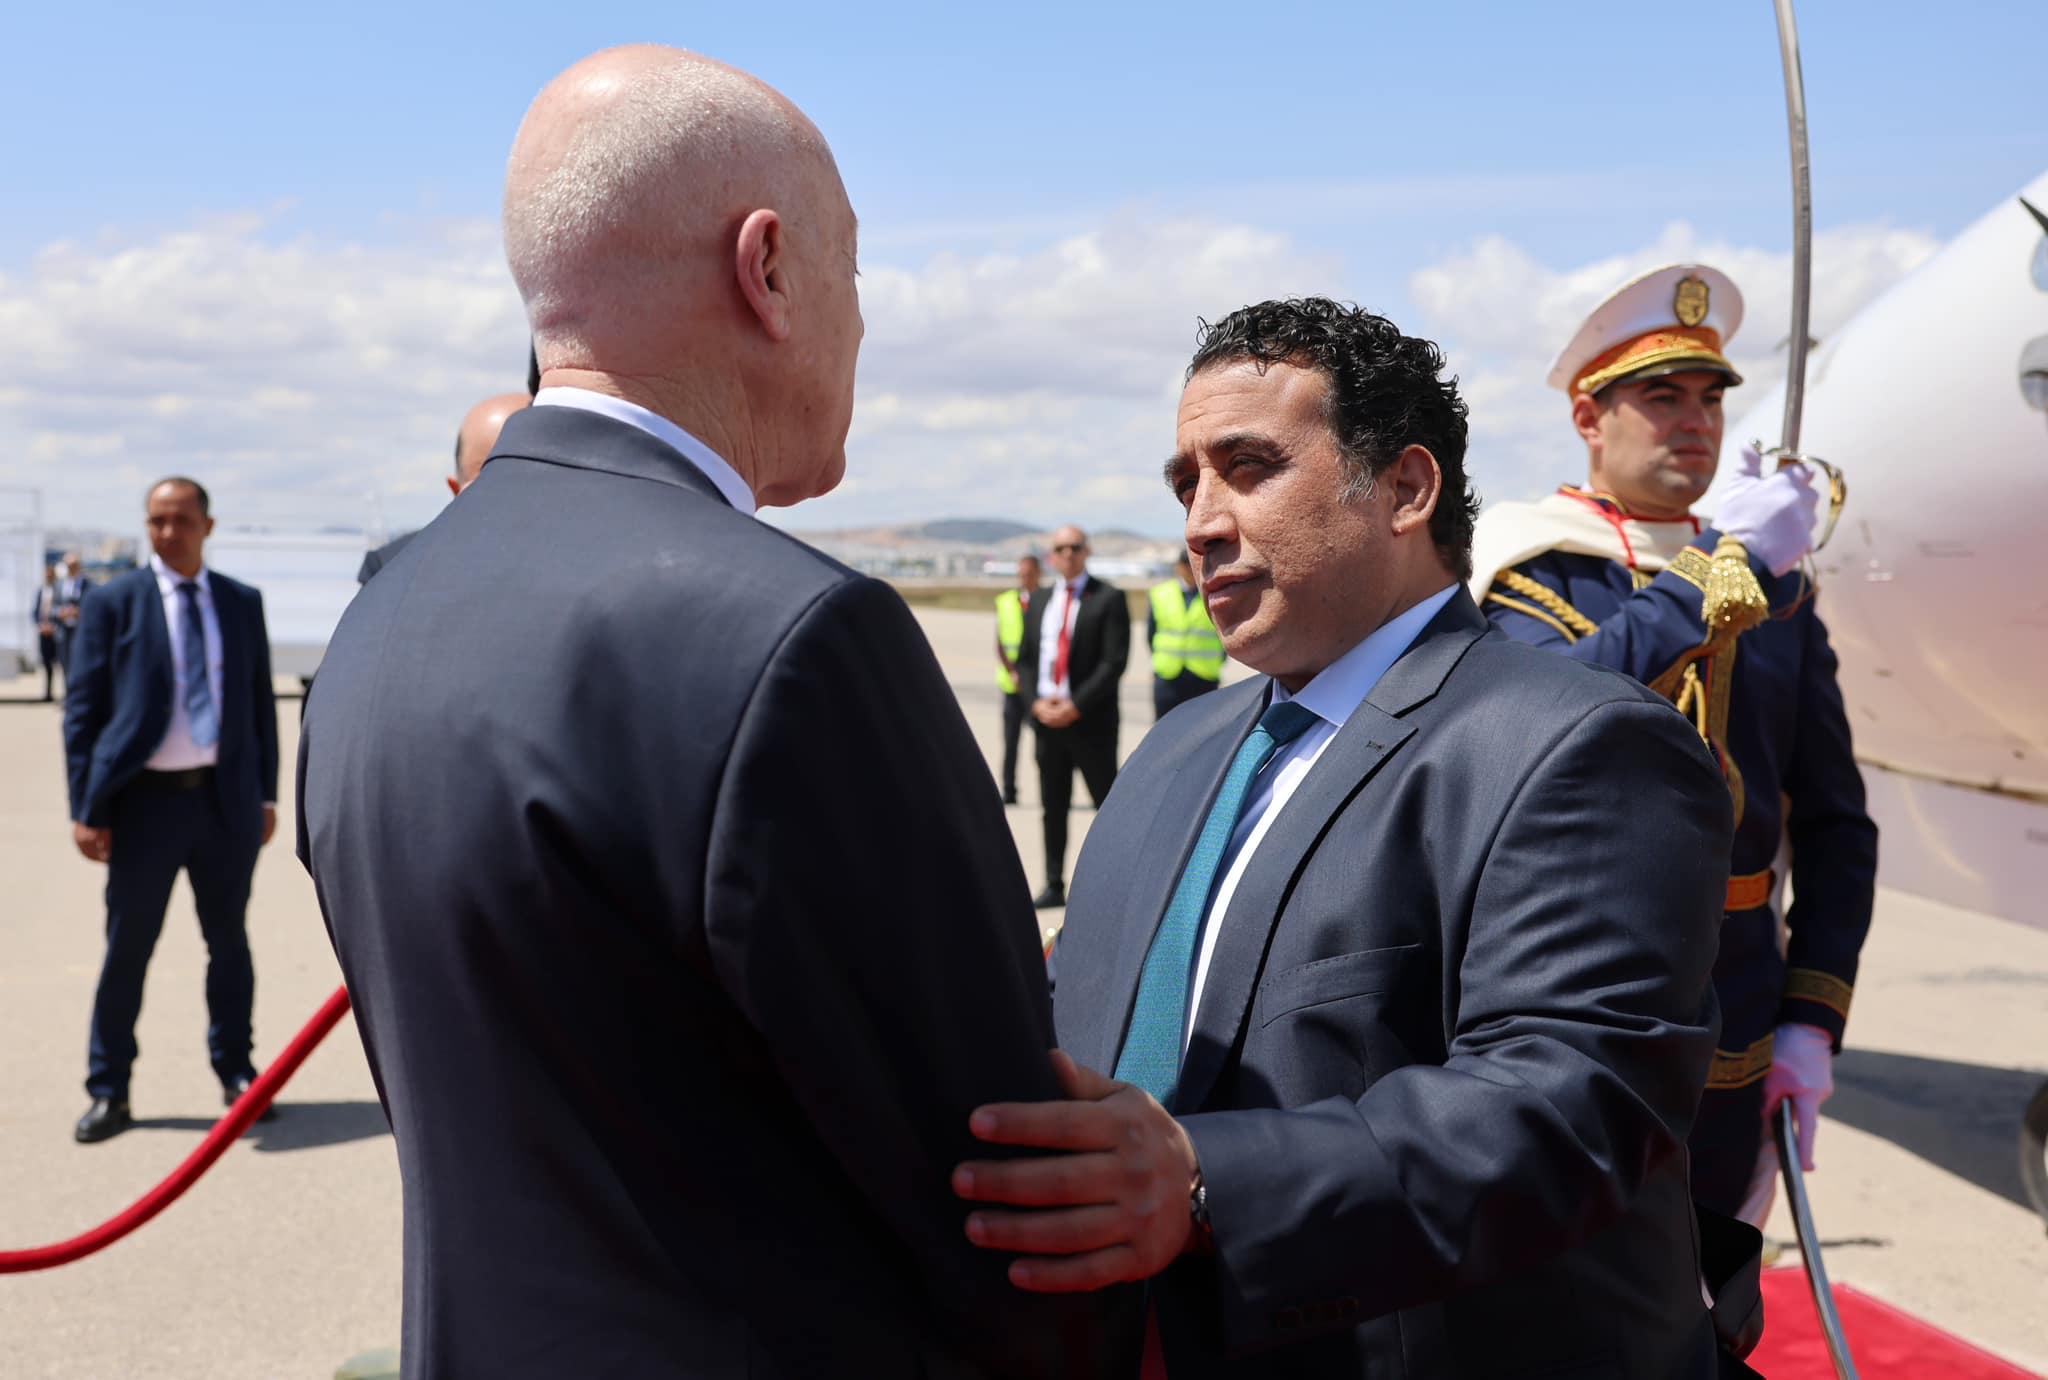 Al-Manfi arrives in Tunisia to participate in the first consultative meeting with Presidents Saied and Tebboune.